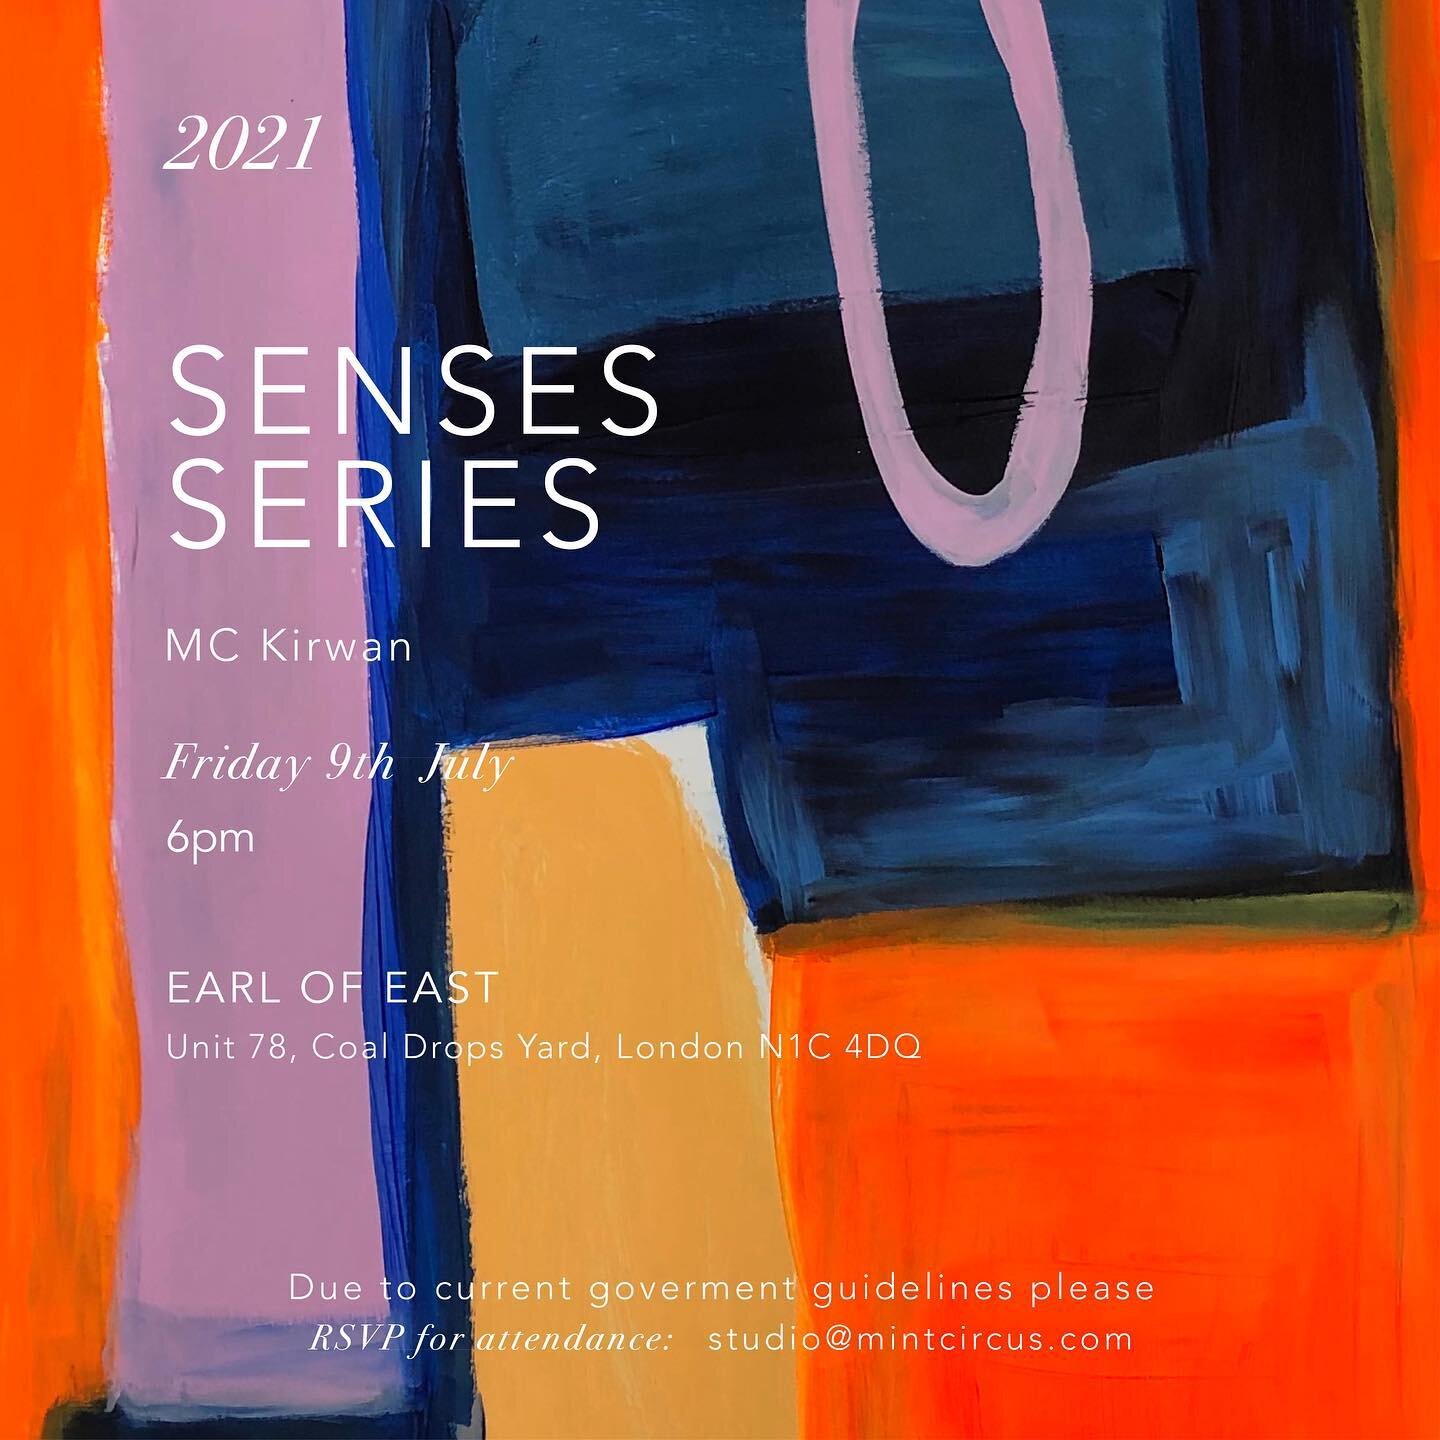 Local #London folk. If your about next Friday evening (9th july) and looking to feed the senses I have my first solo exhibition in the beautiful @earlofeastlondon creative space. The senses series has been a big passion project over the past 18 month